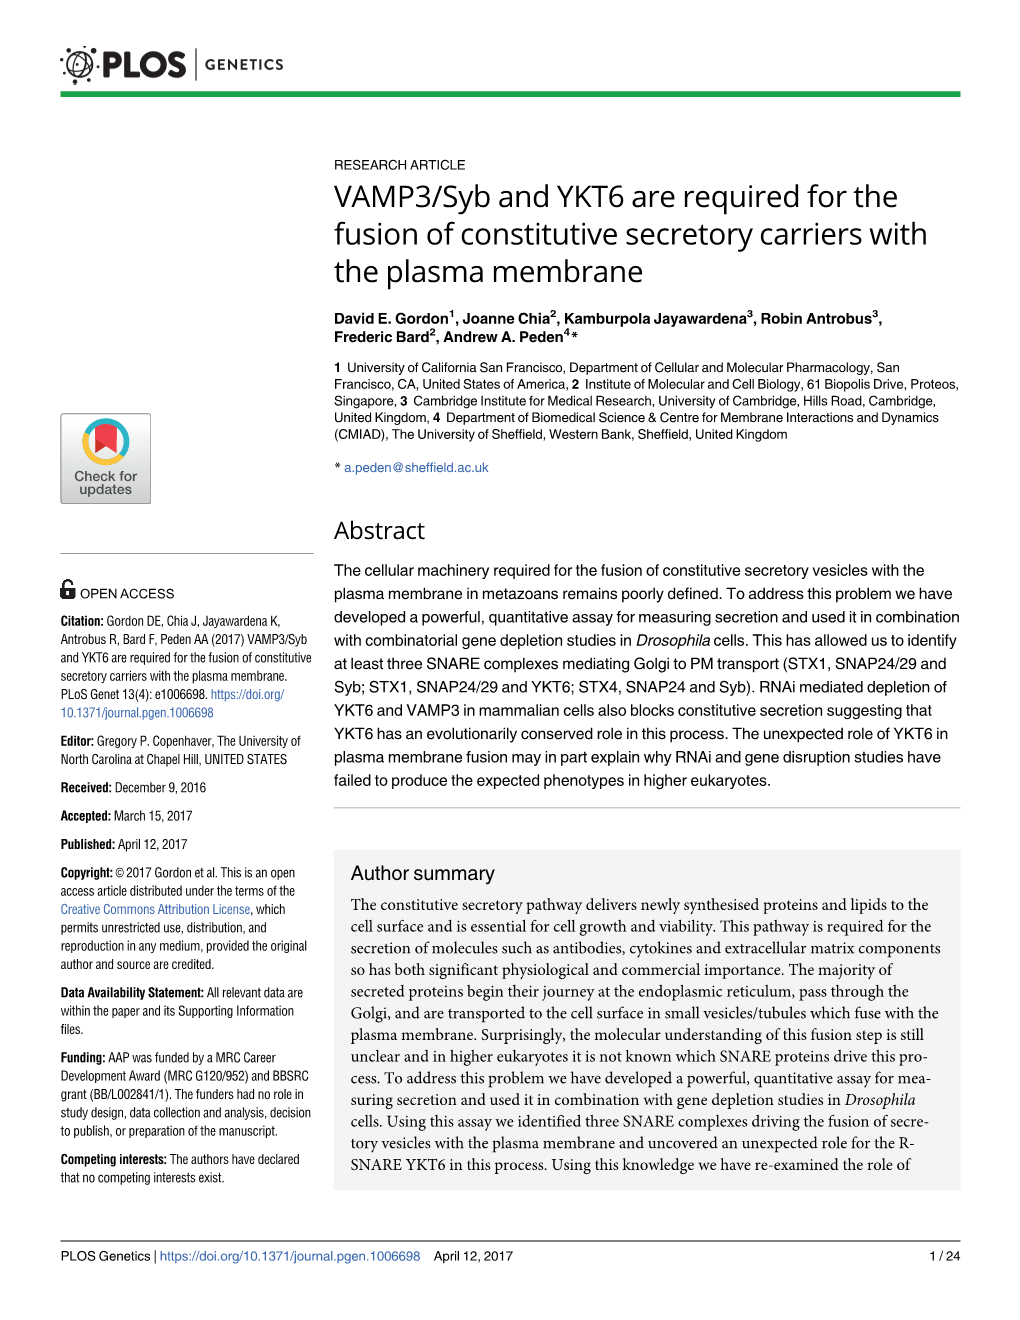 VAMP3/Syb and YKT6 Are Required for the Fusion of Constitutive Secretory Carriers with the Plasma Membrane